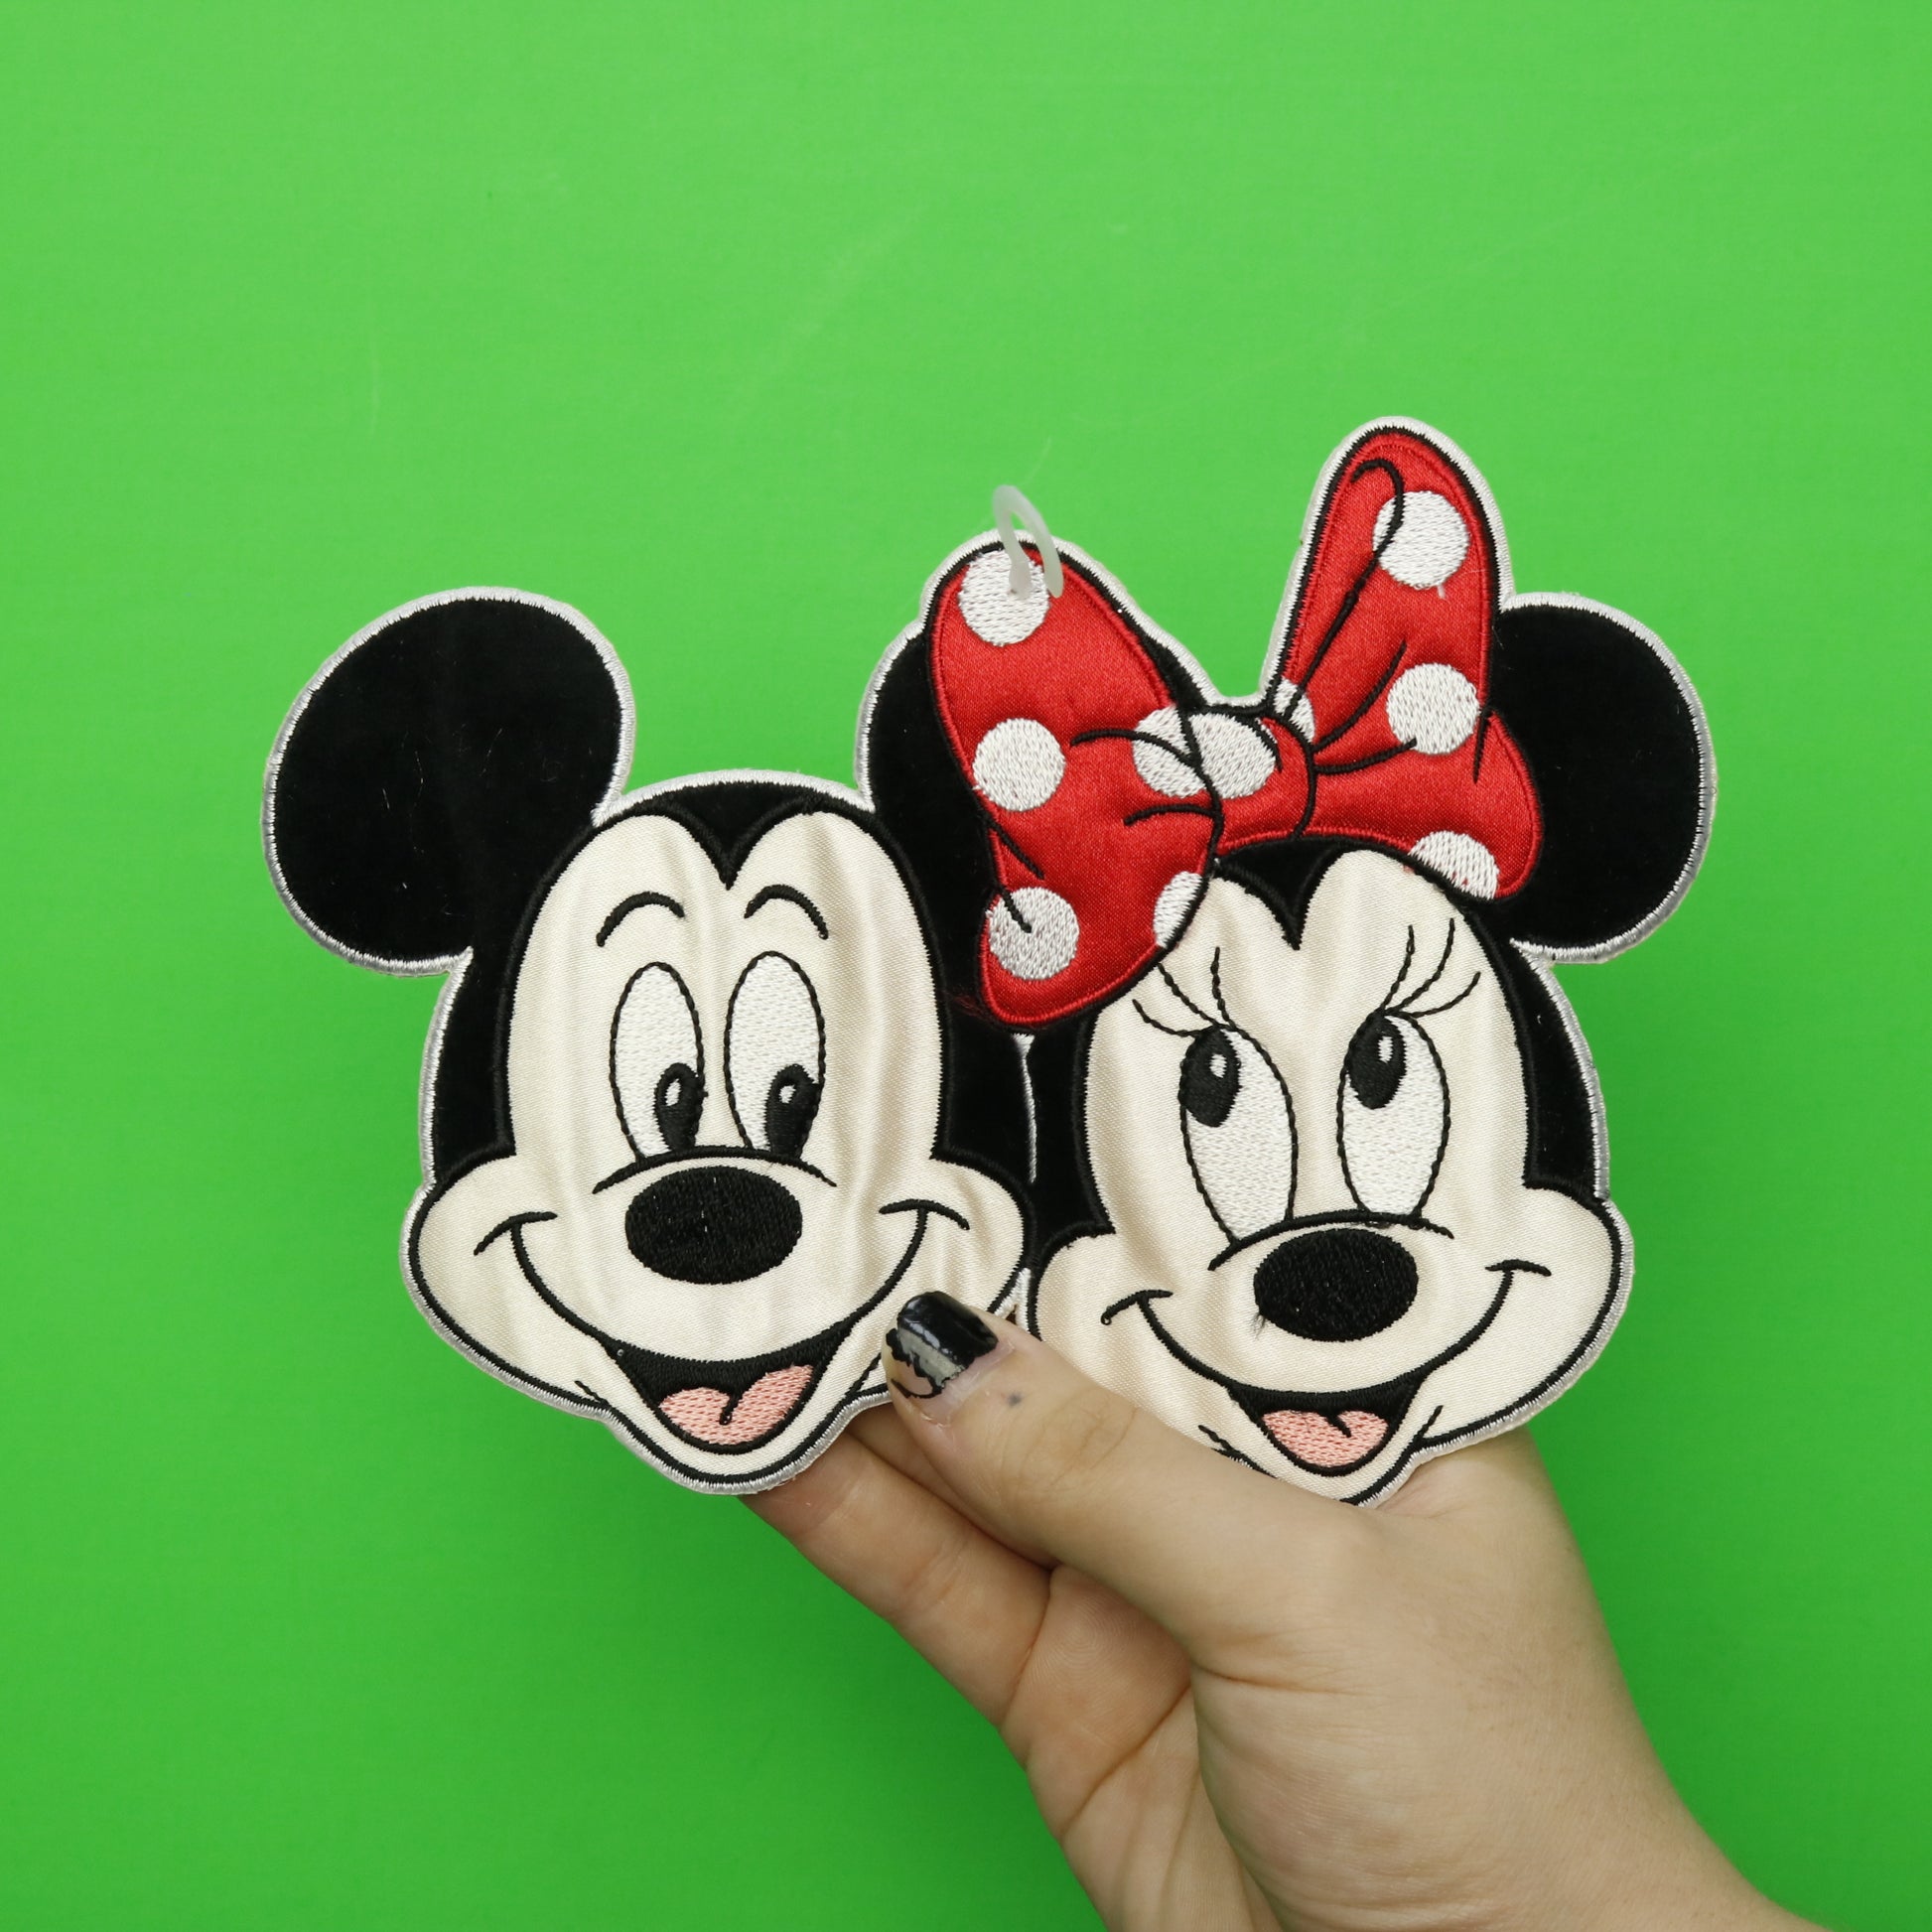 Mickey And Minnie Head Embroidered Applique Iron On Patch 